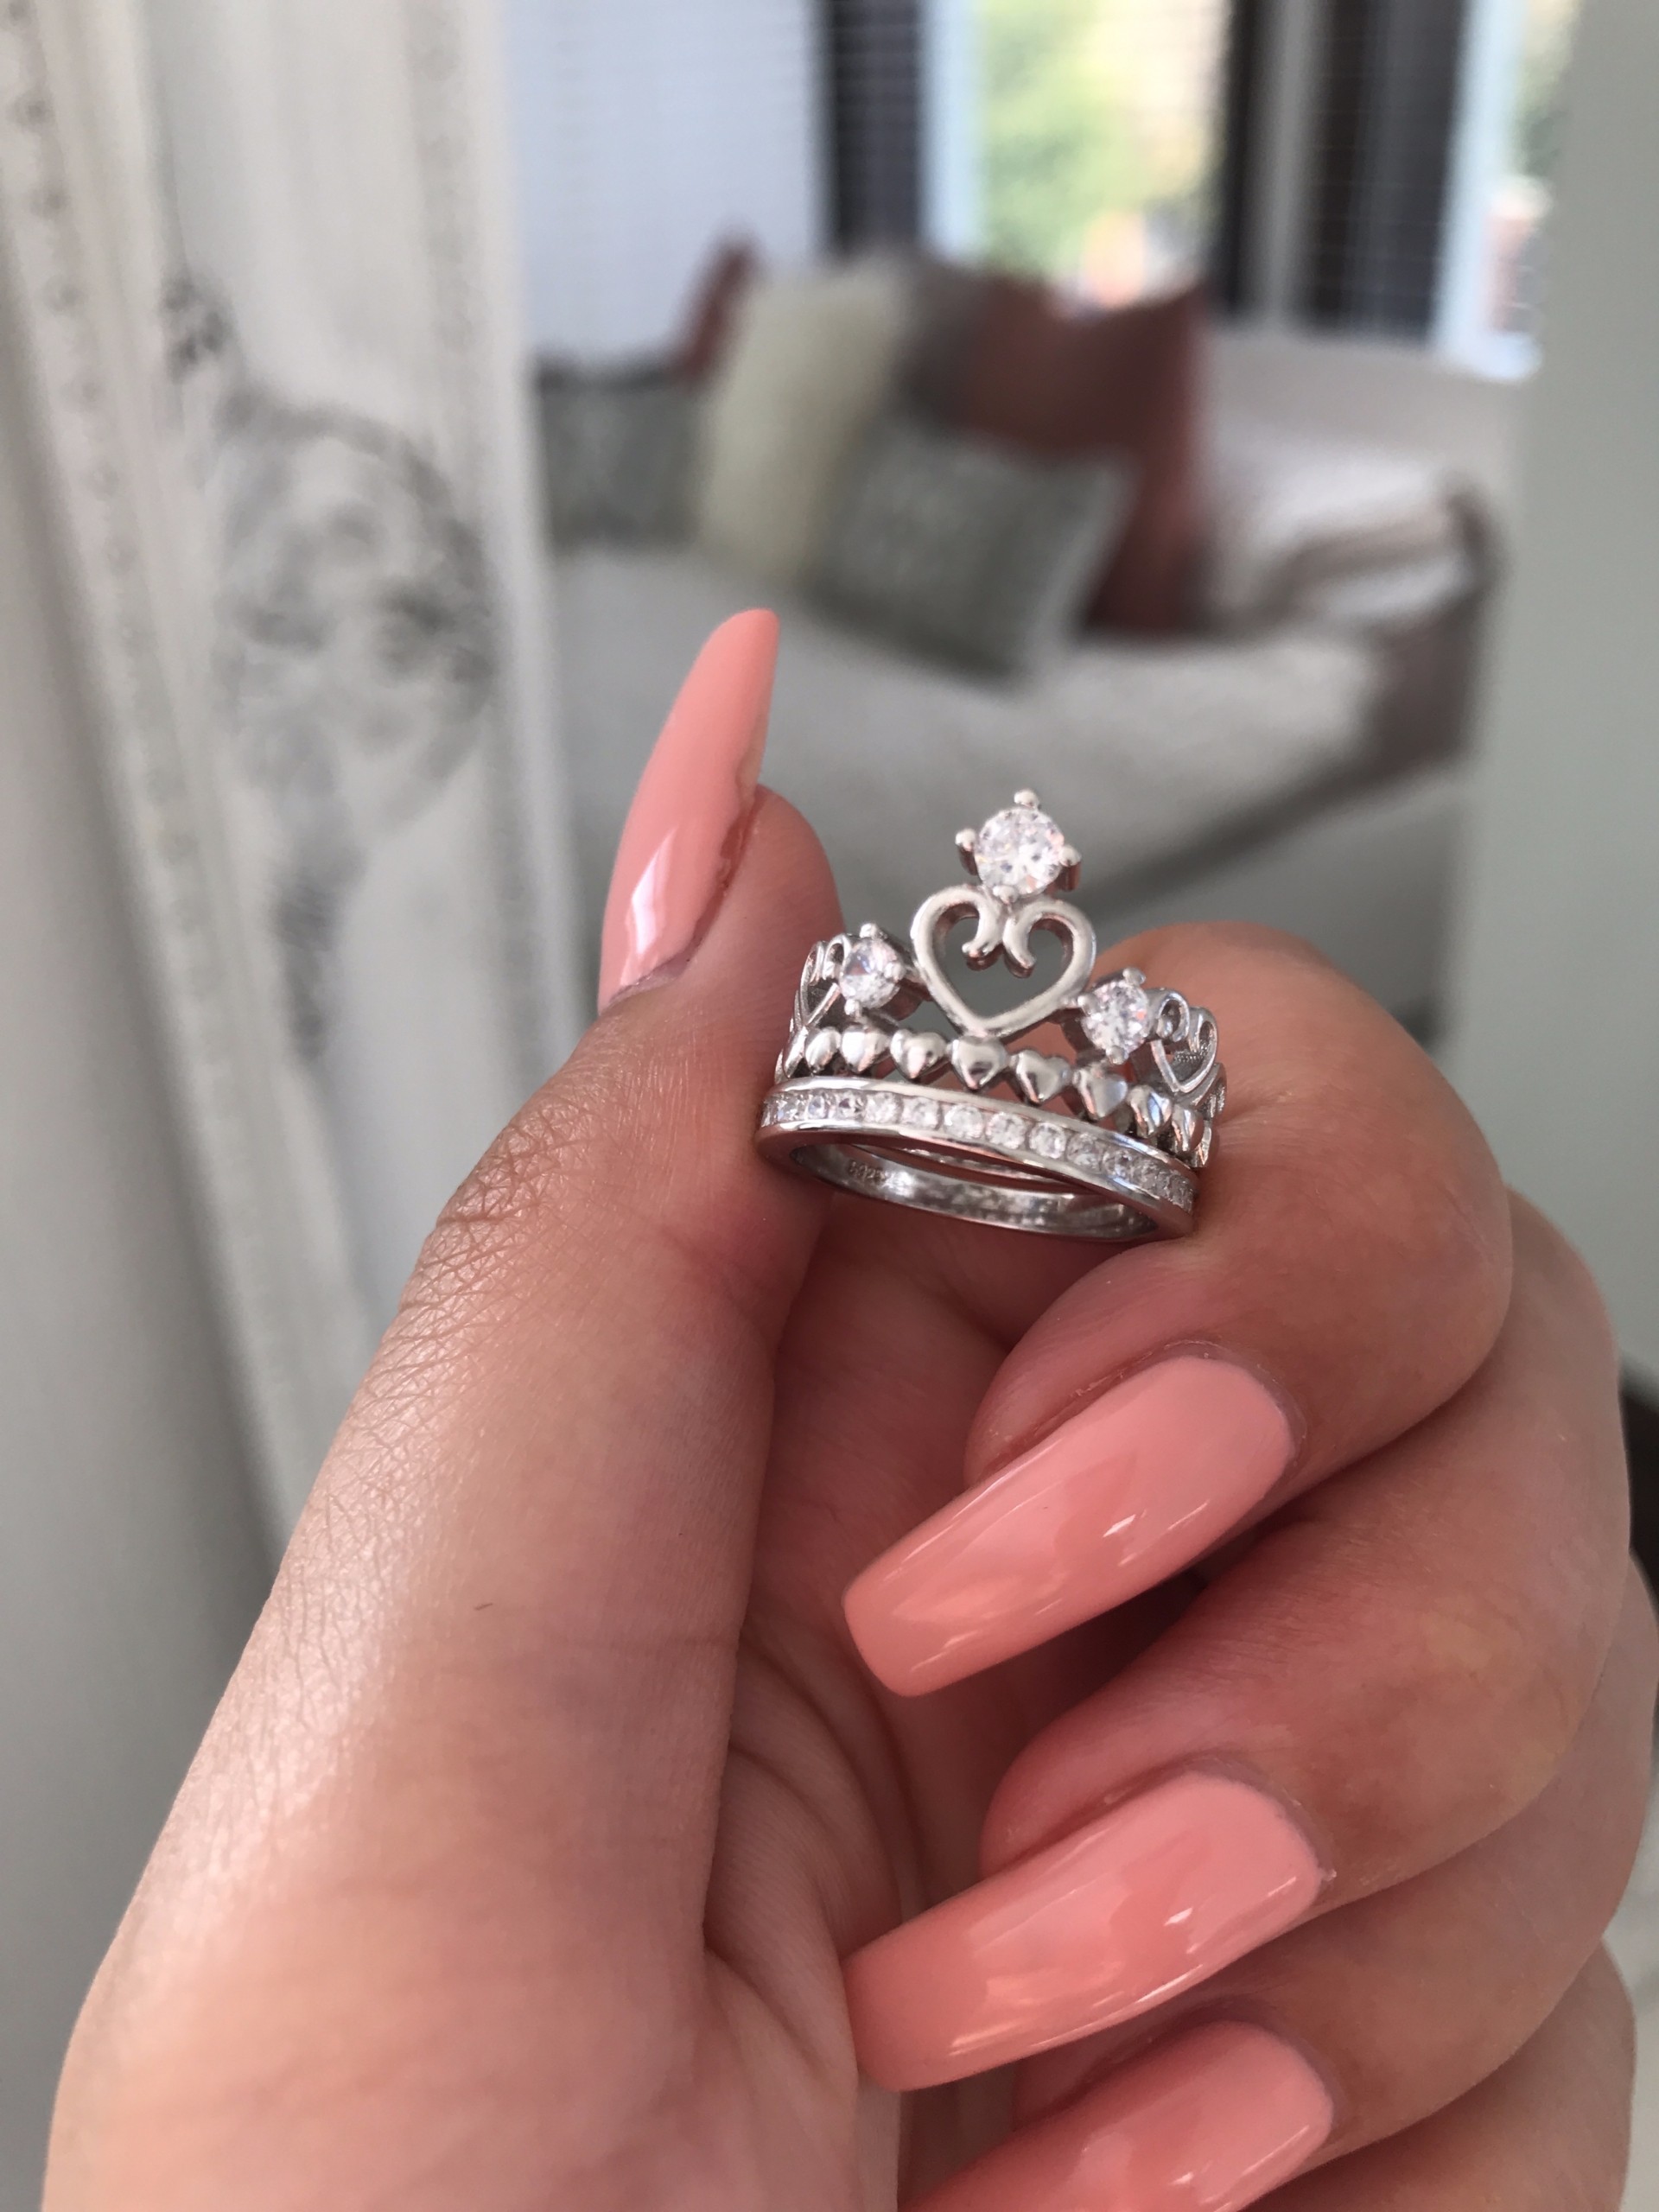 queen of hearts crown ring